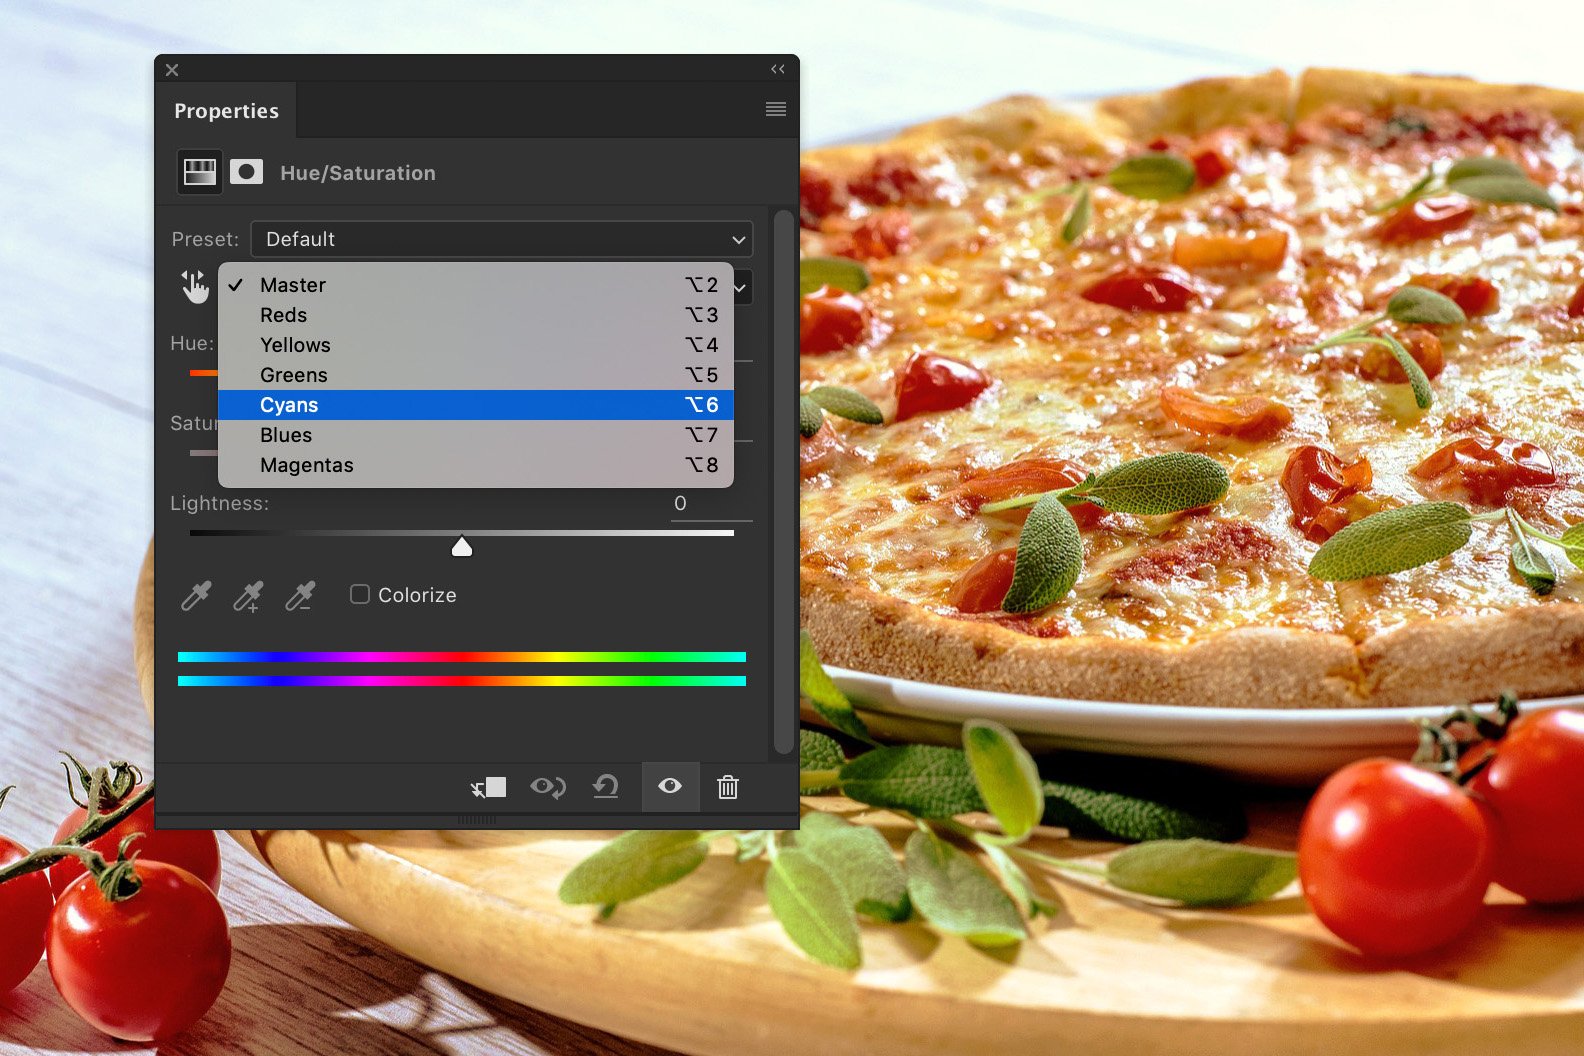 A screenshot showing how to edit food photography in Photoshop - cyans 